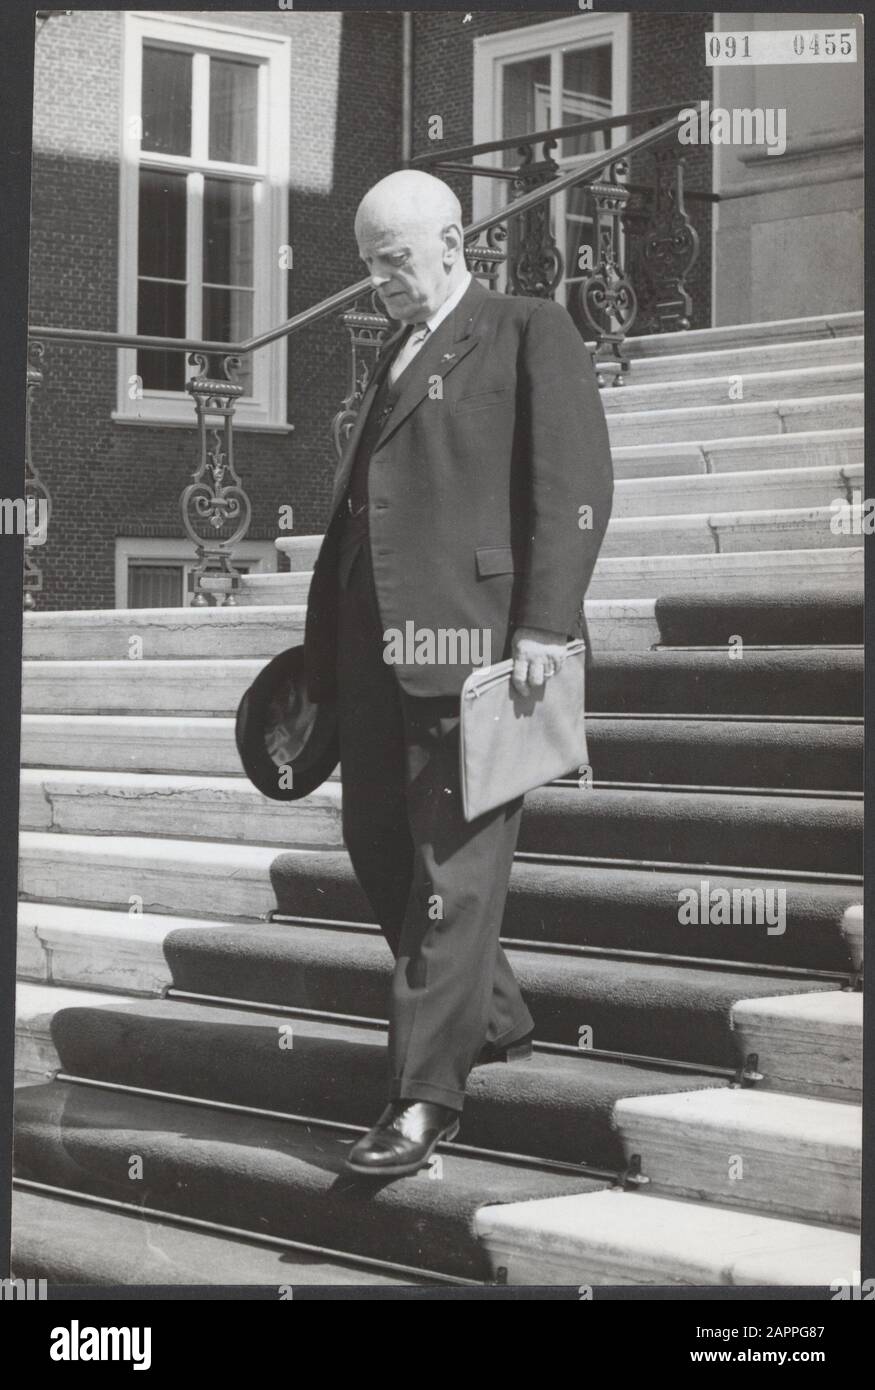 Thursday afternoon H.M. de queen received the advisors for the cabinet formation in The Hague. J.A. Jonkman, president of the First Chamber, leaves the palace Date: 14 June 1956 Location: The Hague, Zuid-Holland Keywords: cabinet formations, politics, chairmen Personal name: Jonkman J.A. Institution name: First Chamber Stock Photo